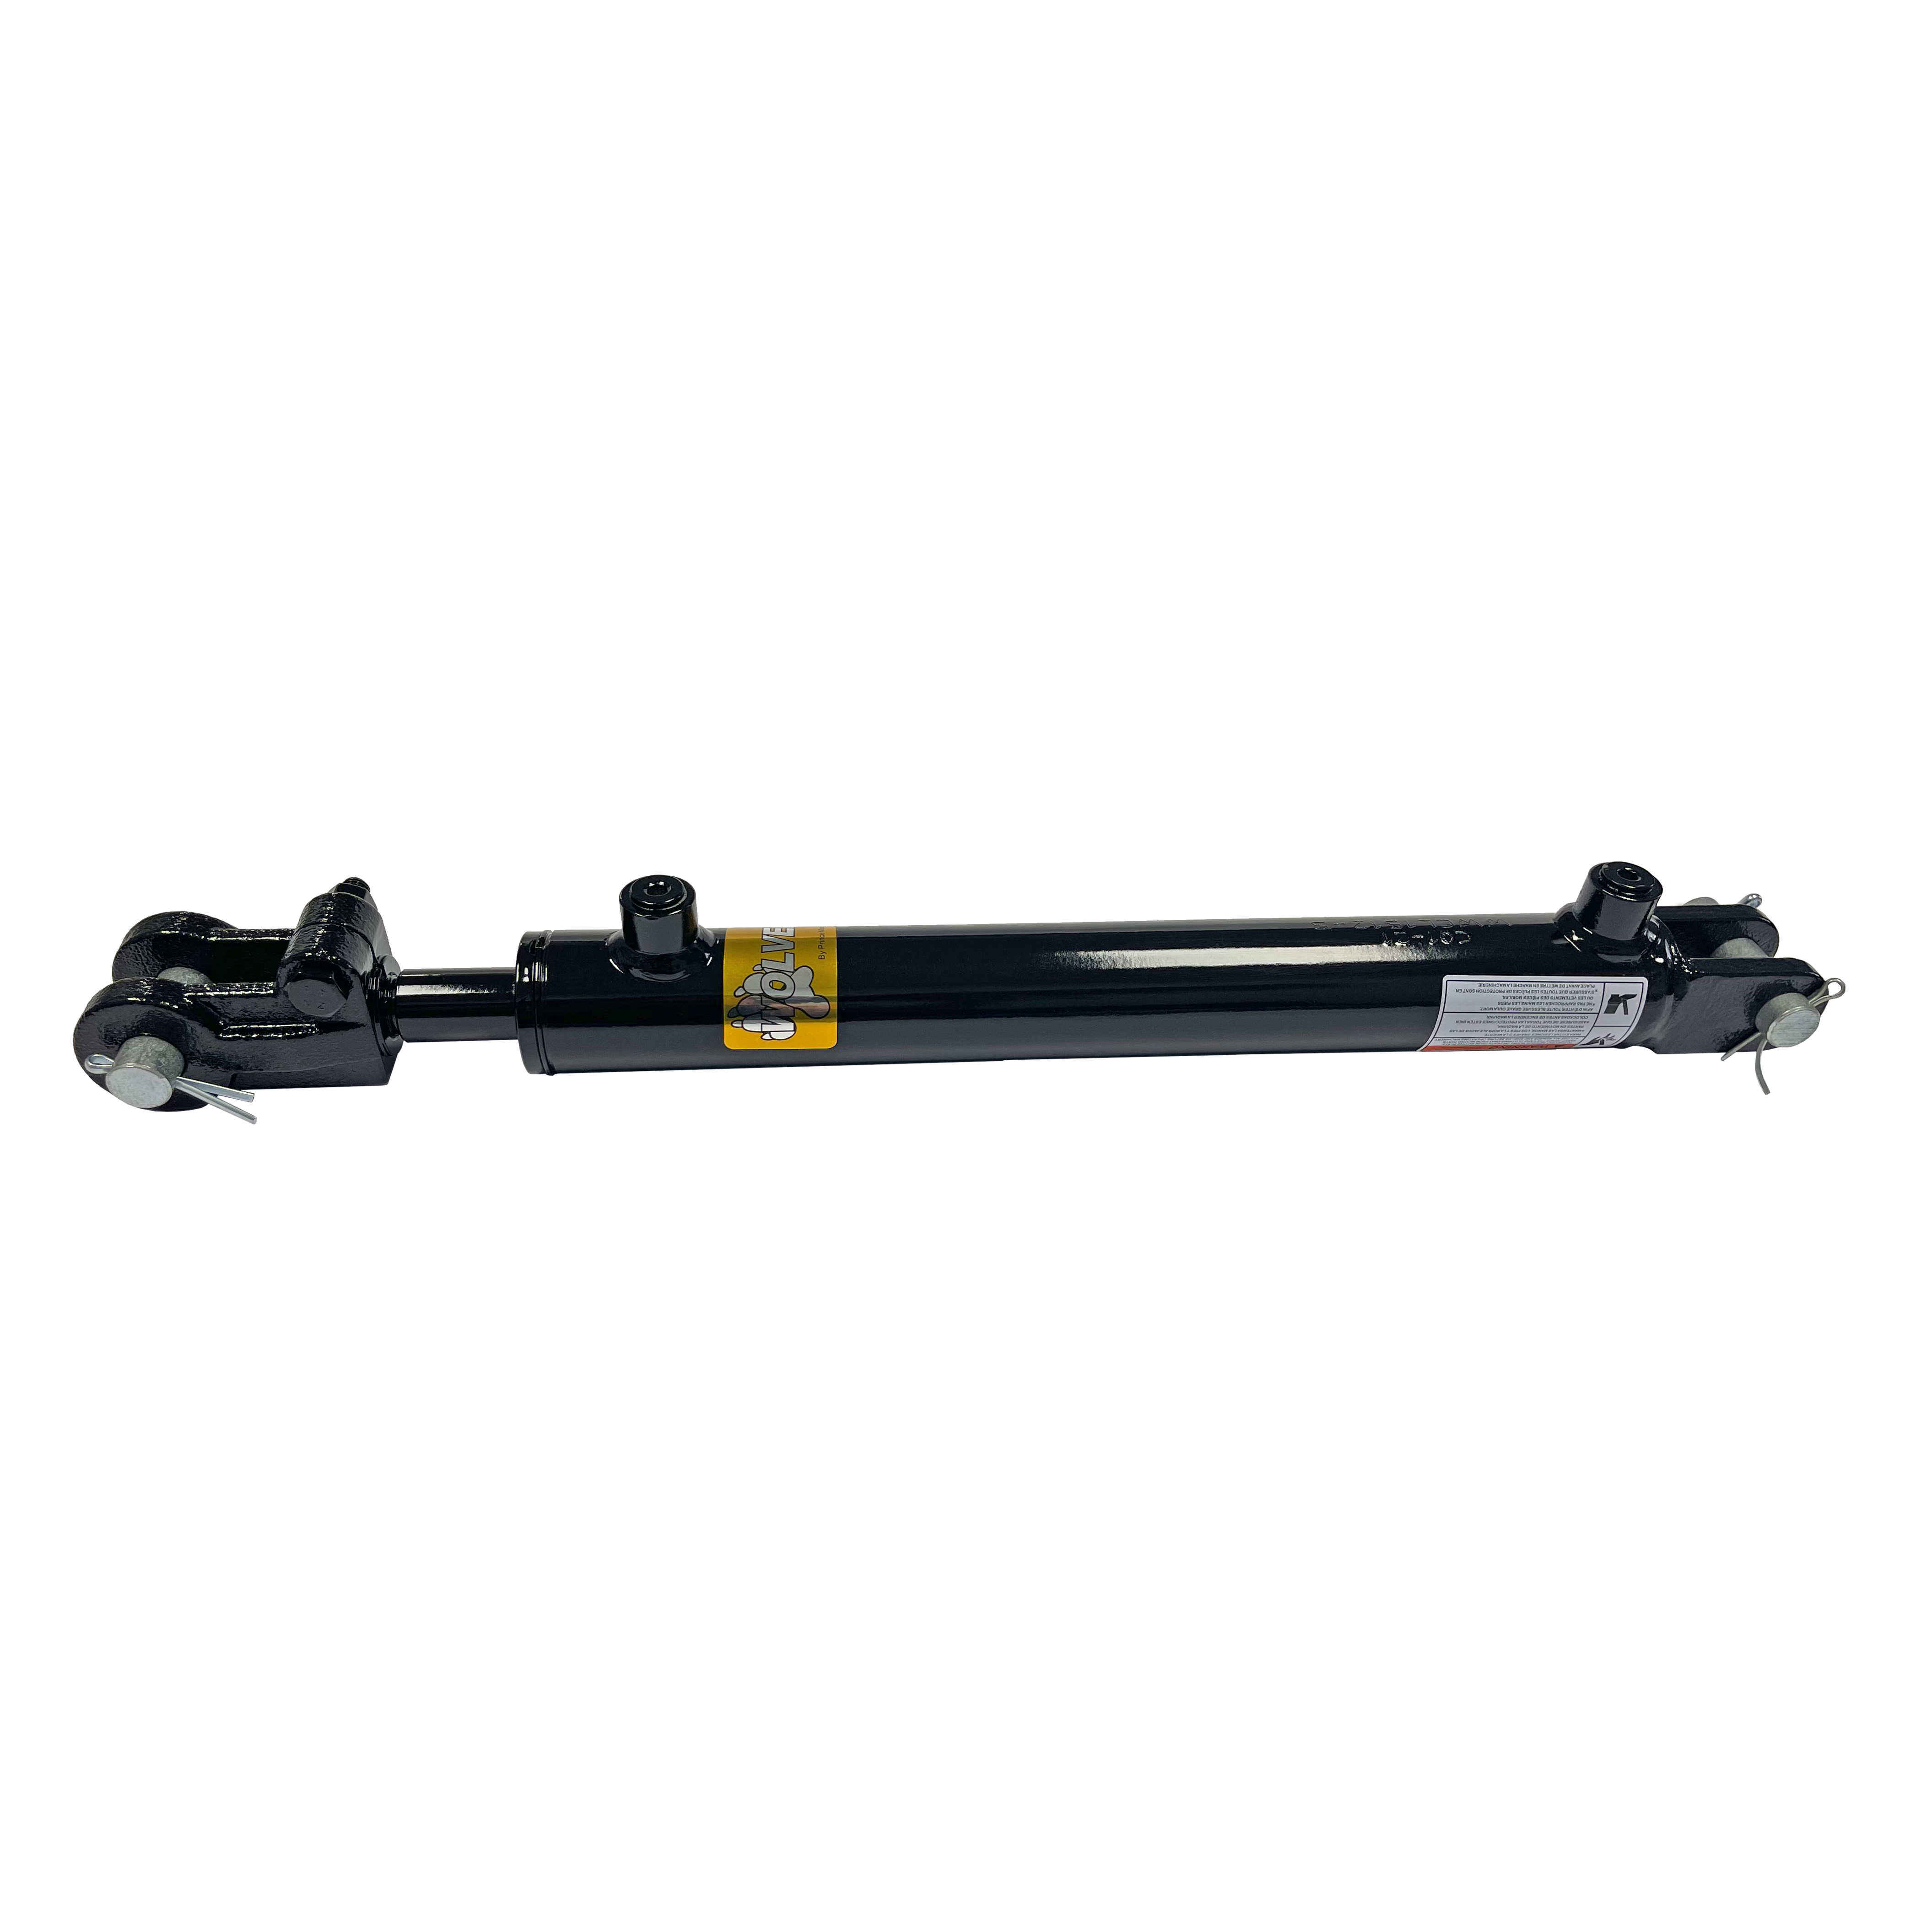 1.5 bore x 18 stroke Clevis hydraulic cylinder, welded Clevis double acting cylinder | Prince Hydraulics